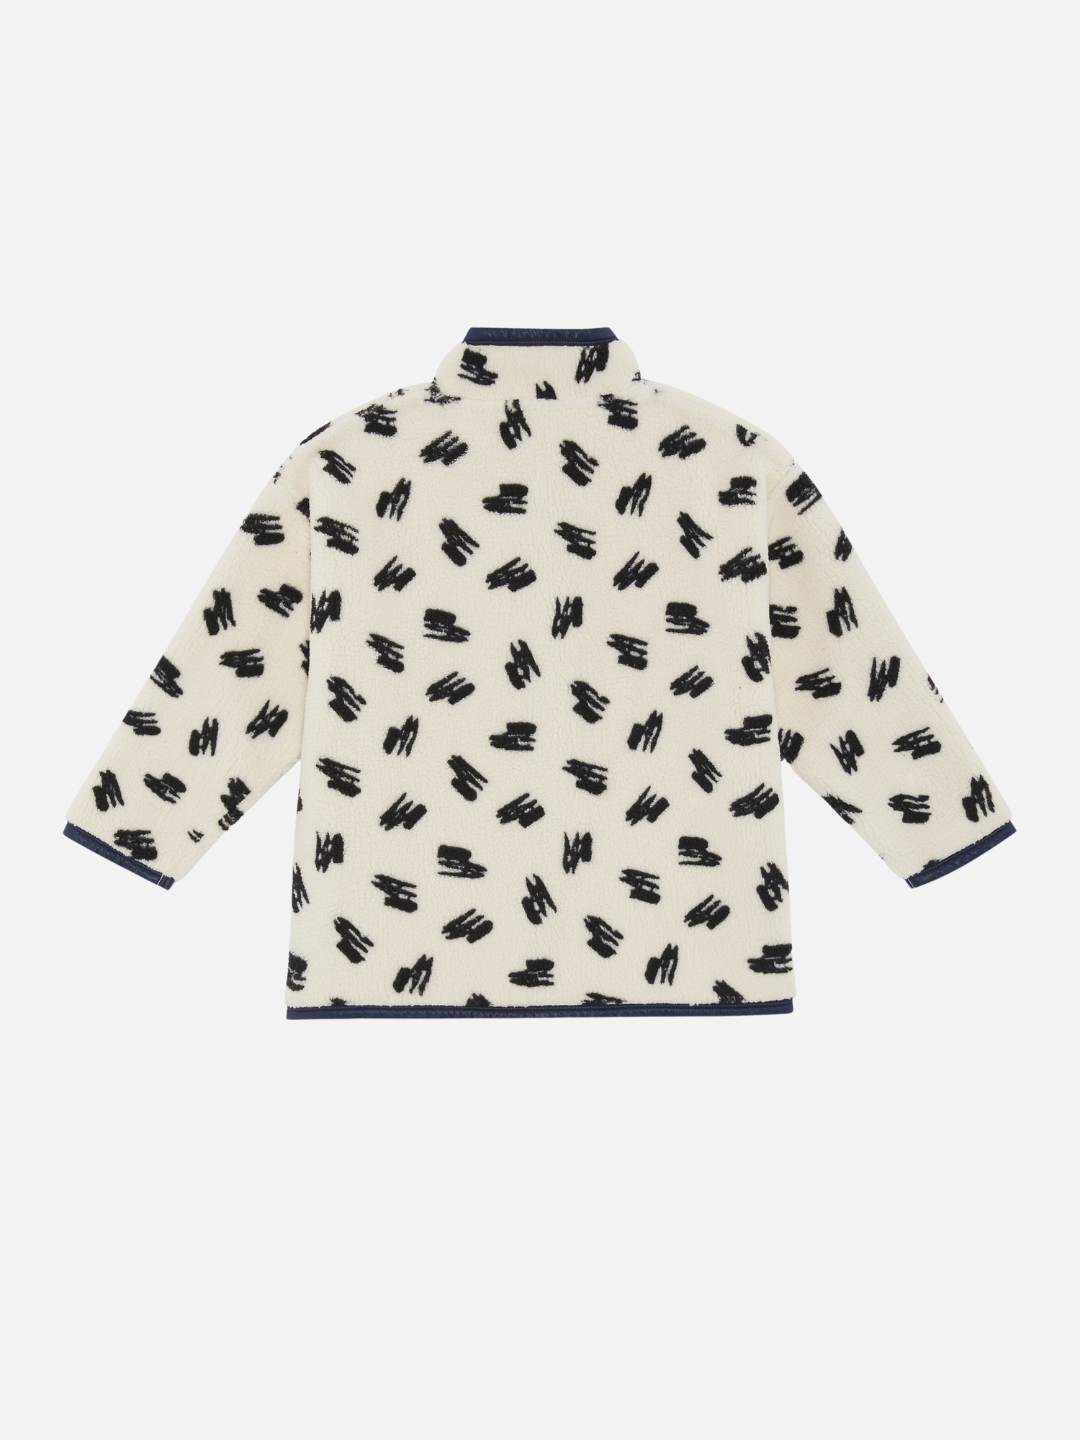 A kids' jacket in a pattern of black scribbles on a cream background, back view